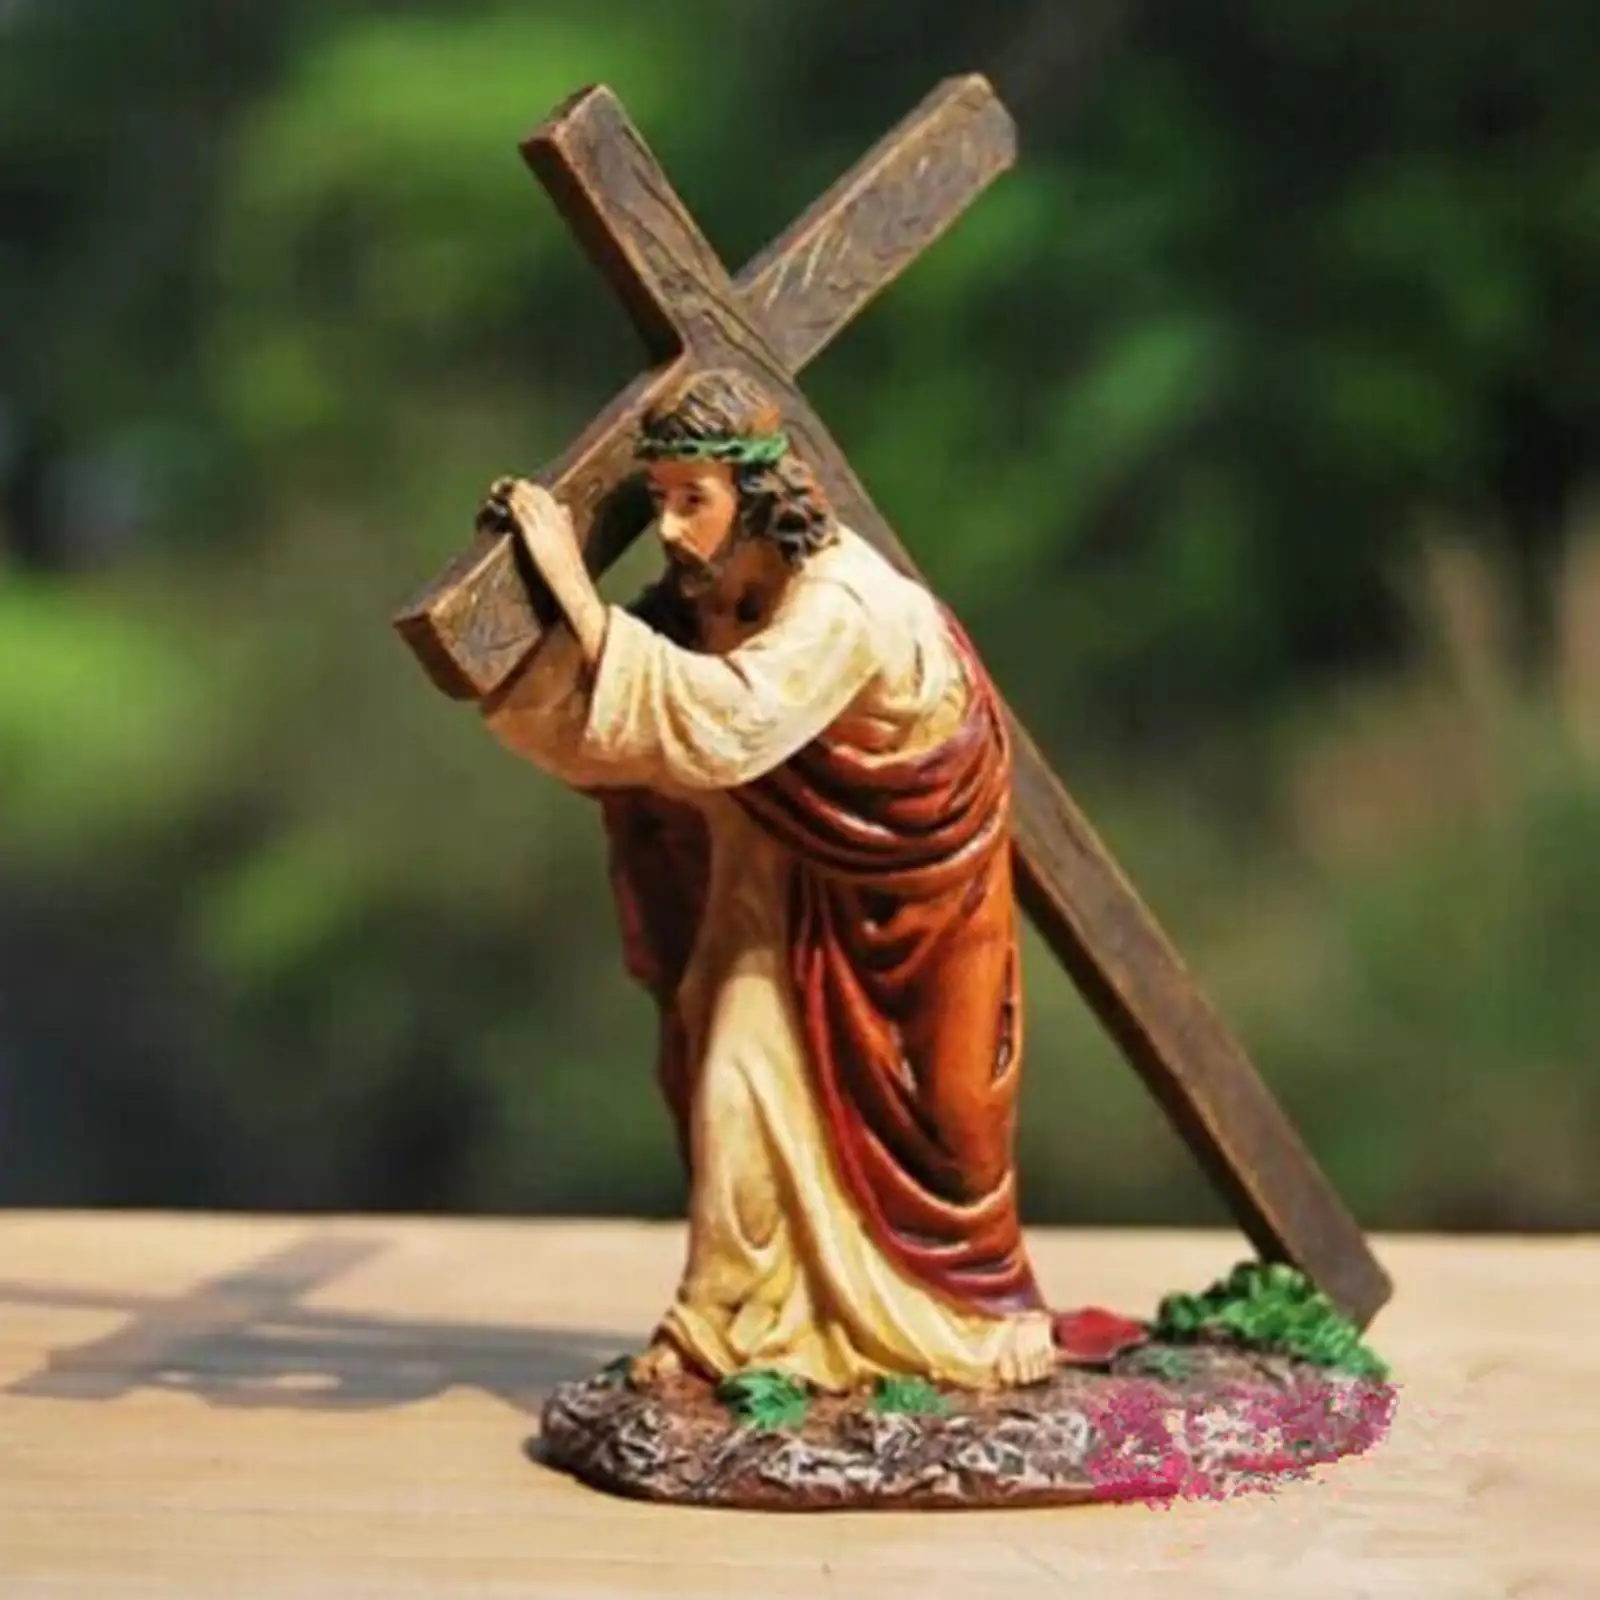 Statue Cross Figurine Christ Holy Decor Sculpture Tabletop Collection